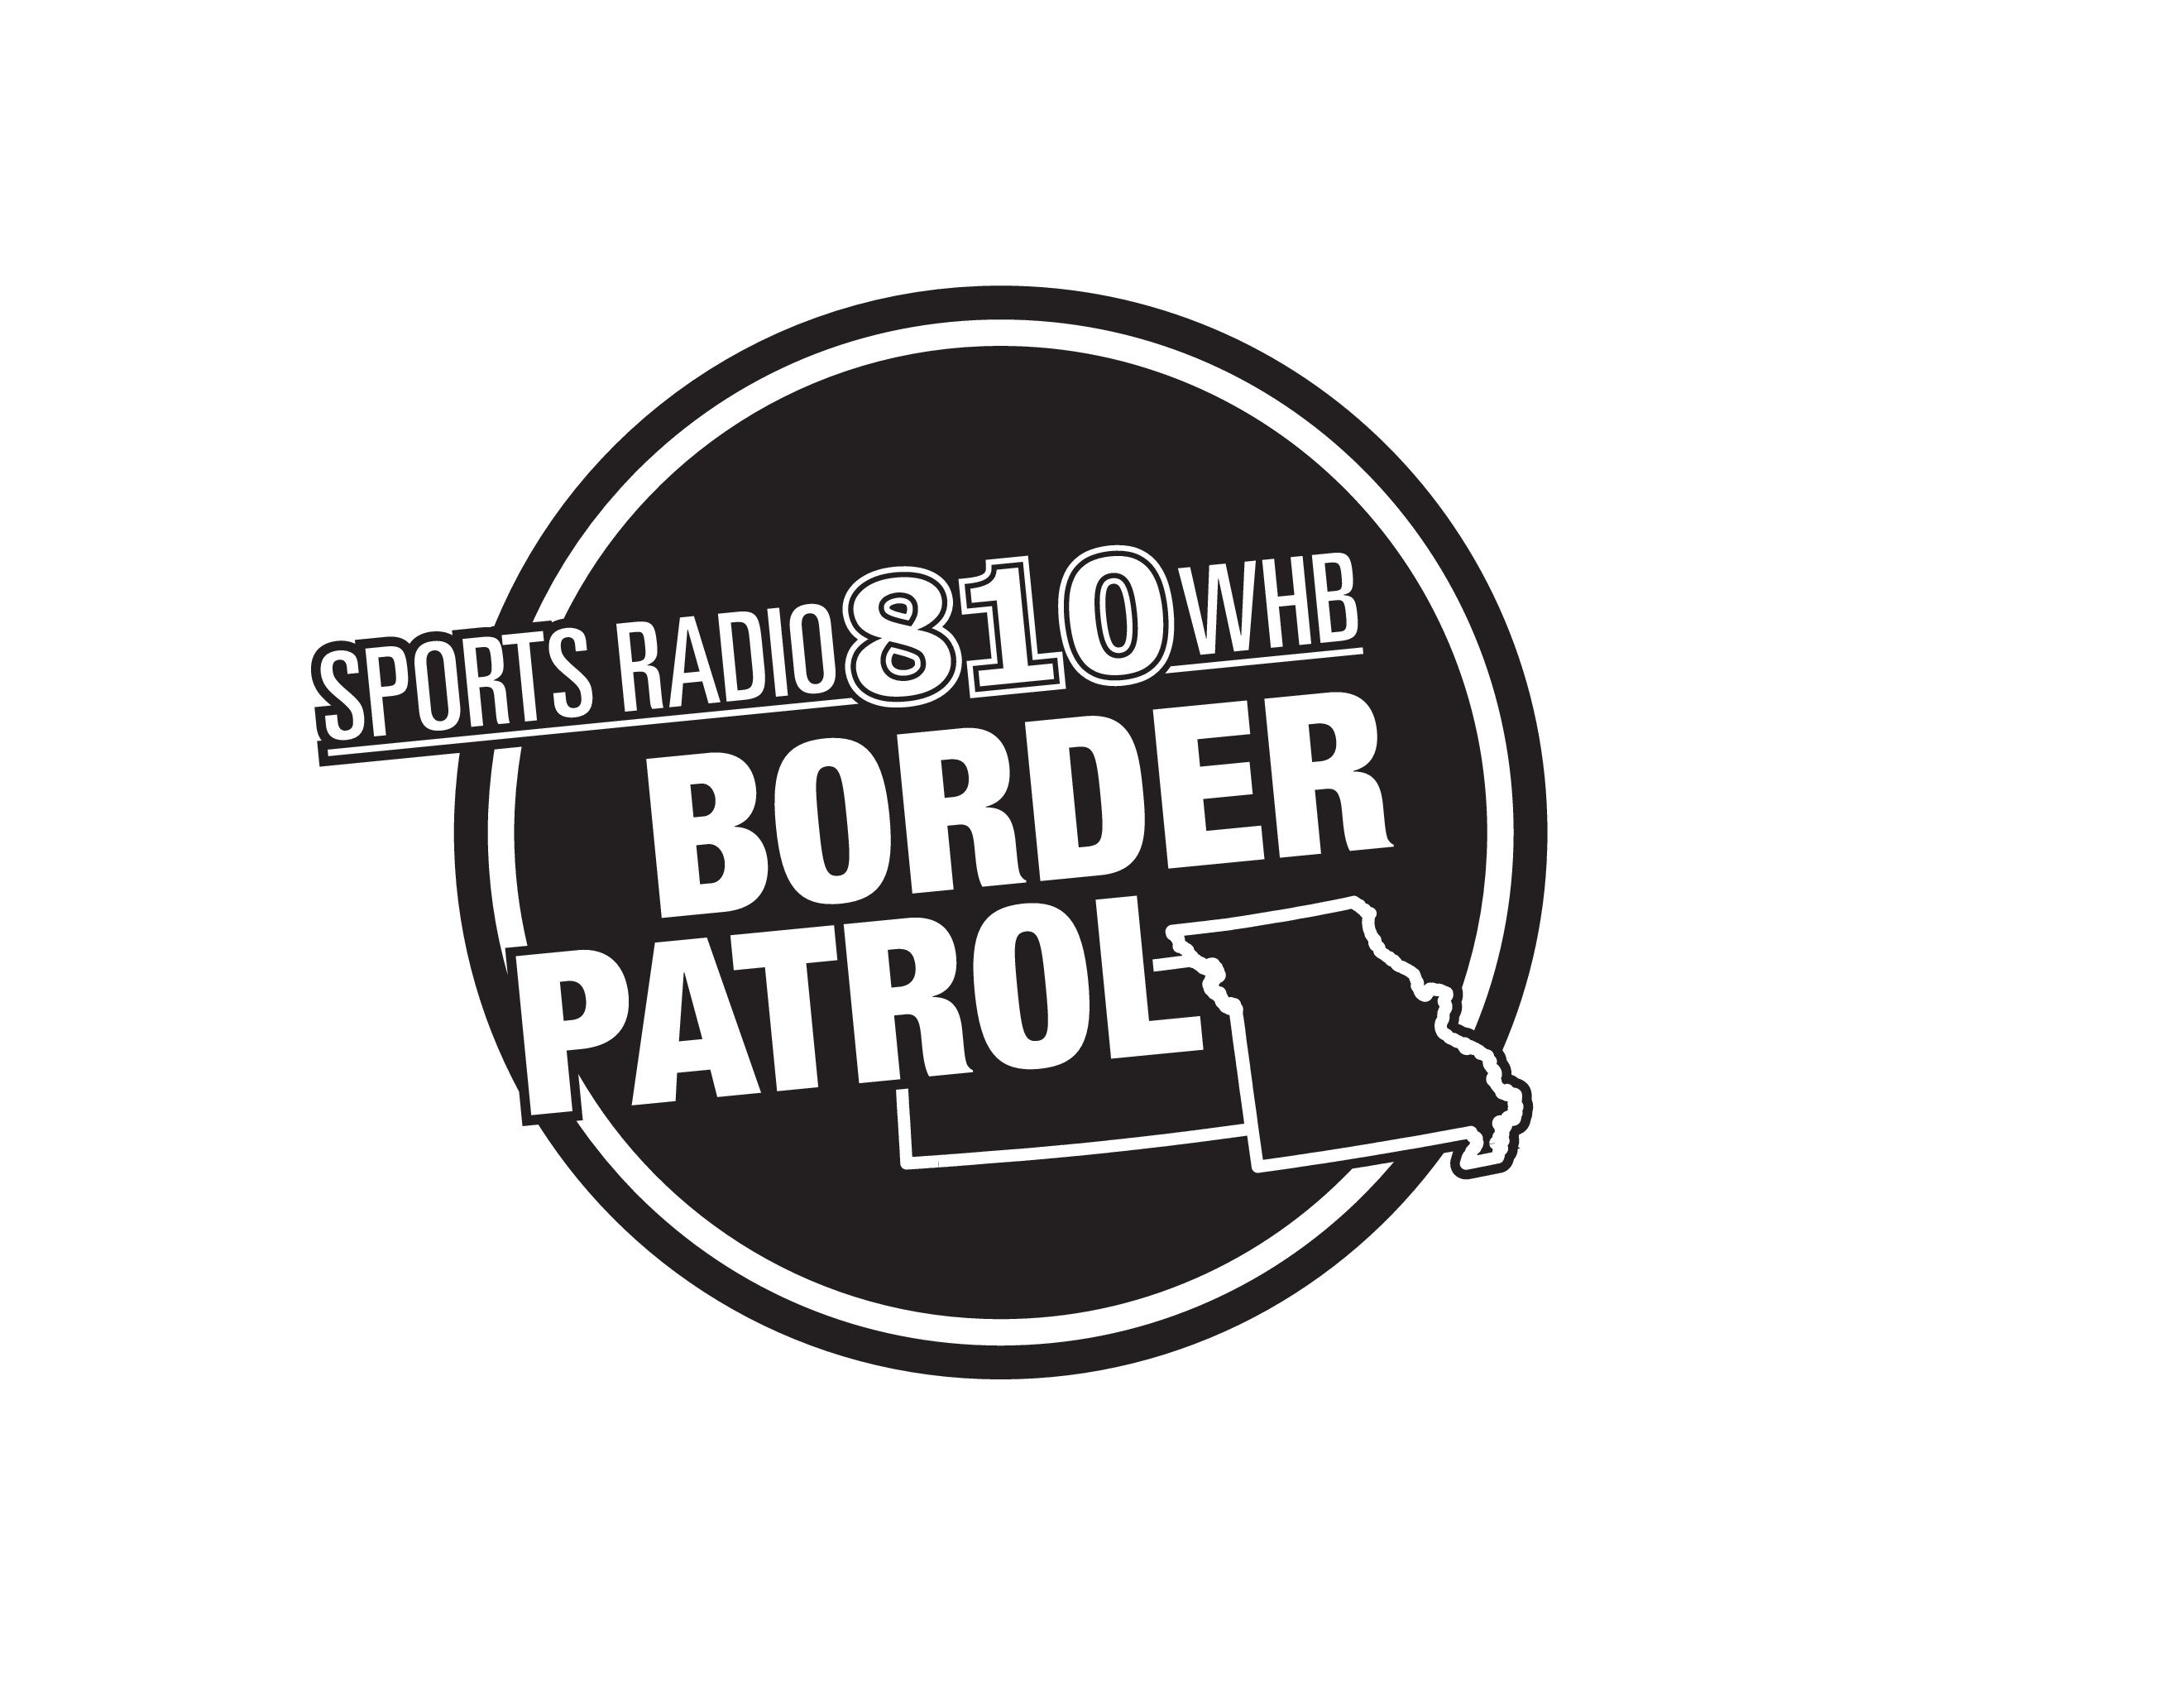 11-17-22 HR 1 of The Border Patrol on 38 The Spot